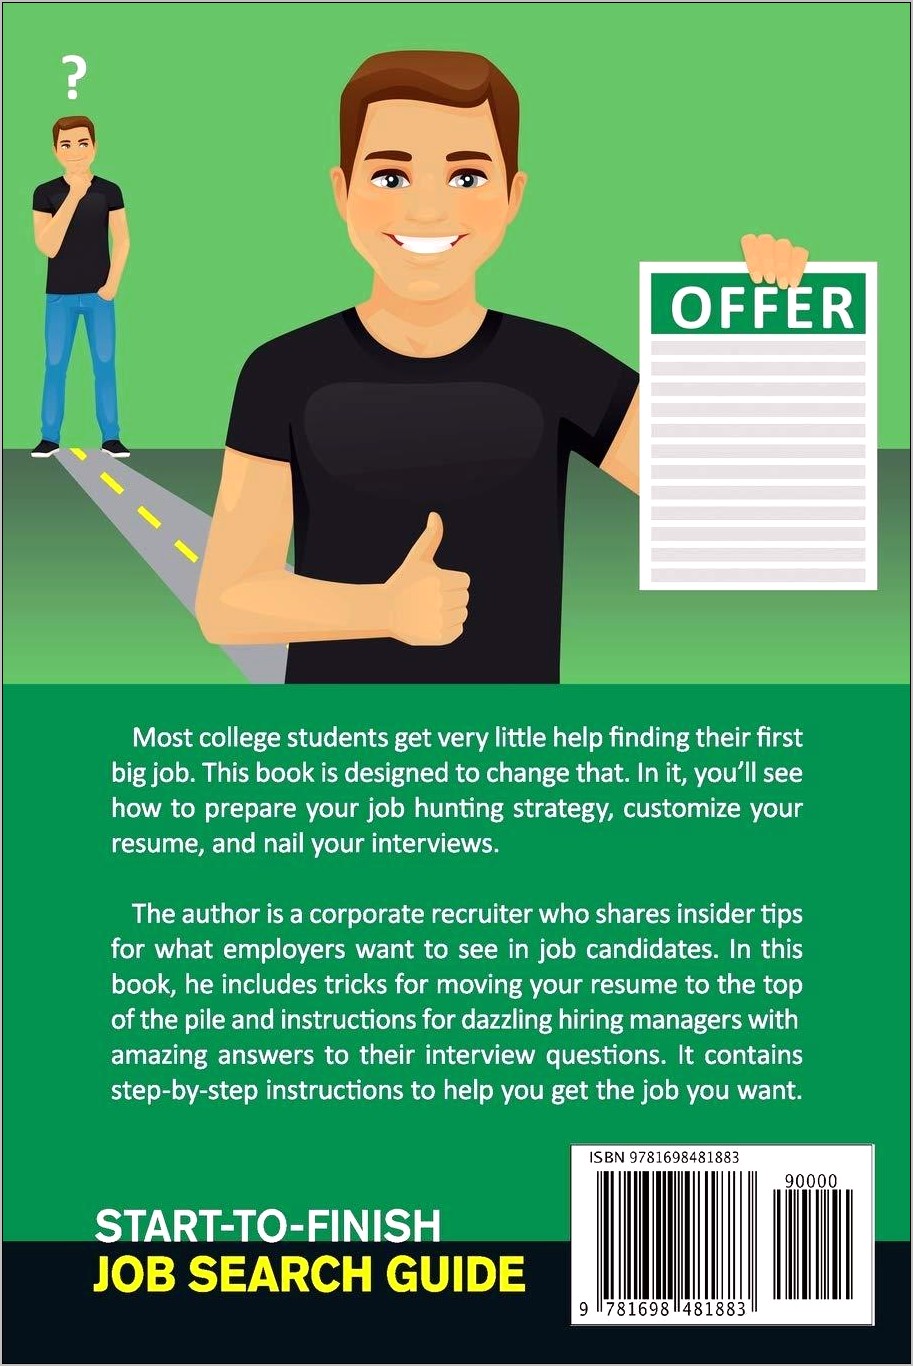 Resume Preparation Interviewing Techniques And Job Searching Strategies